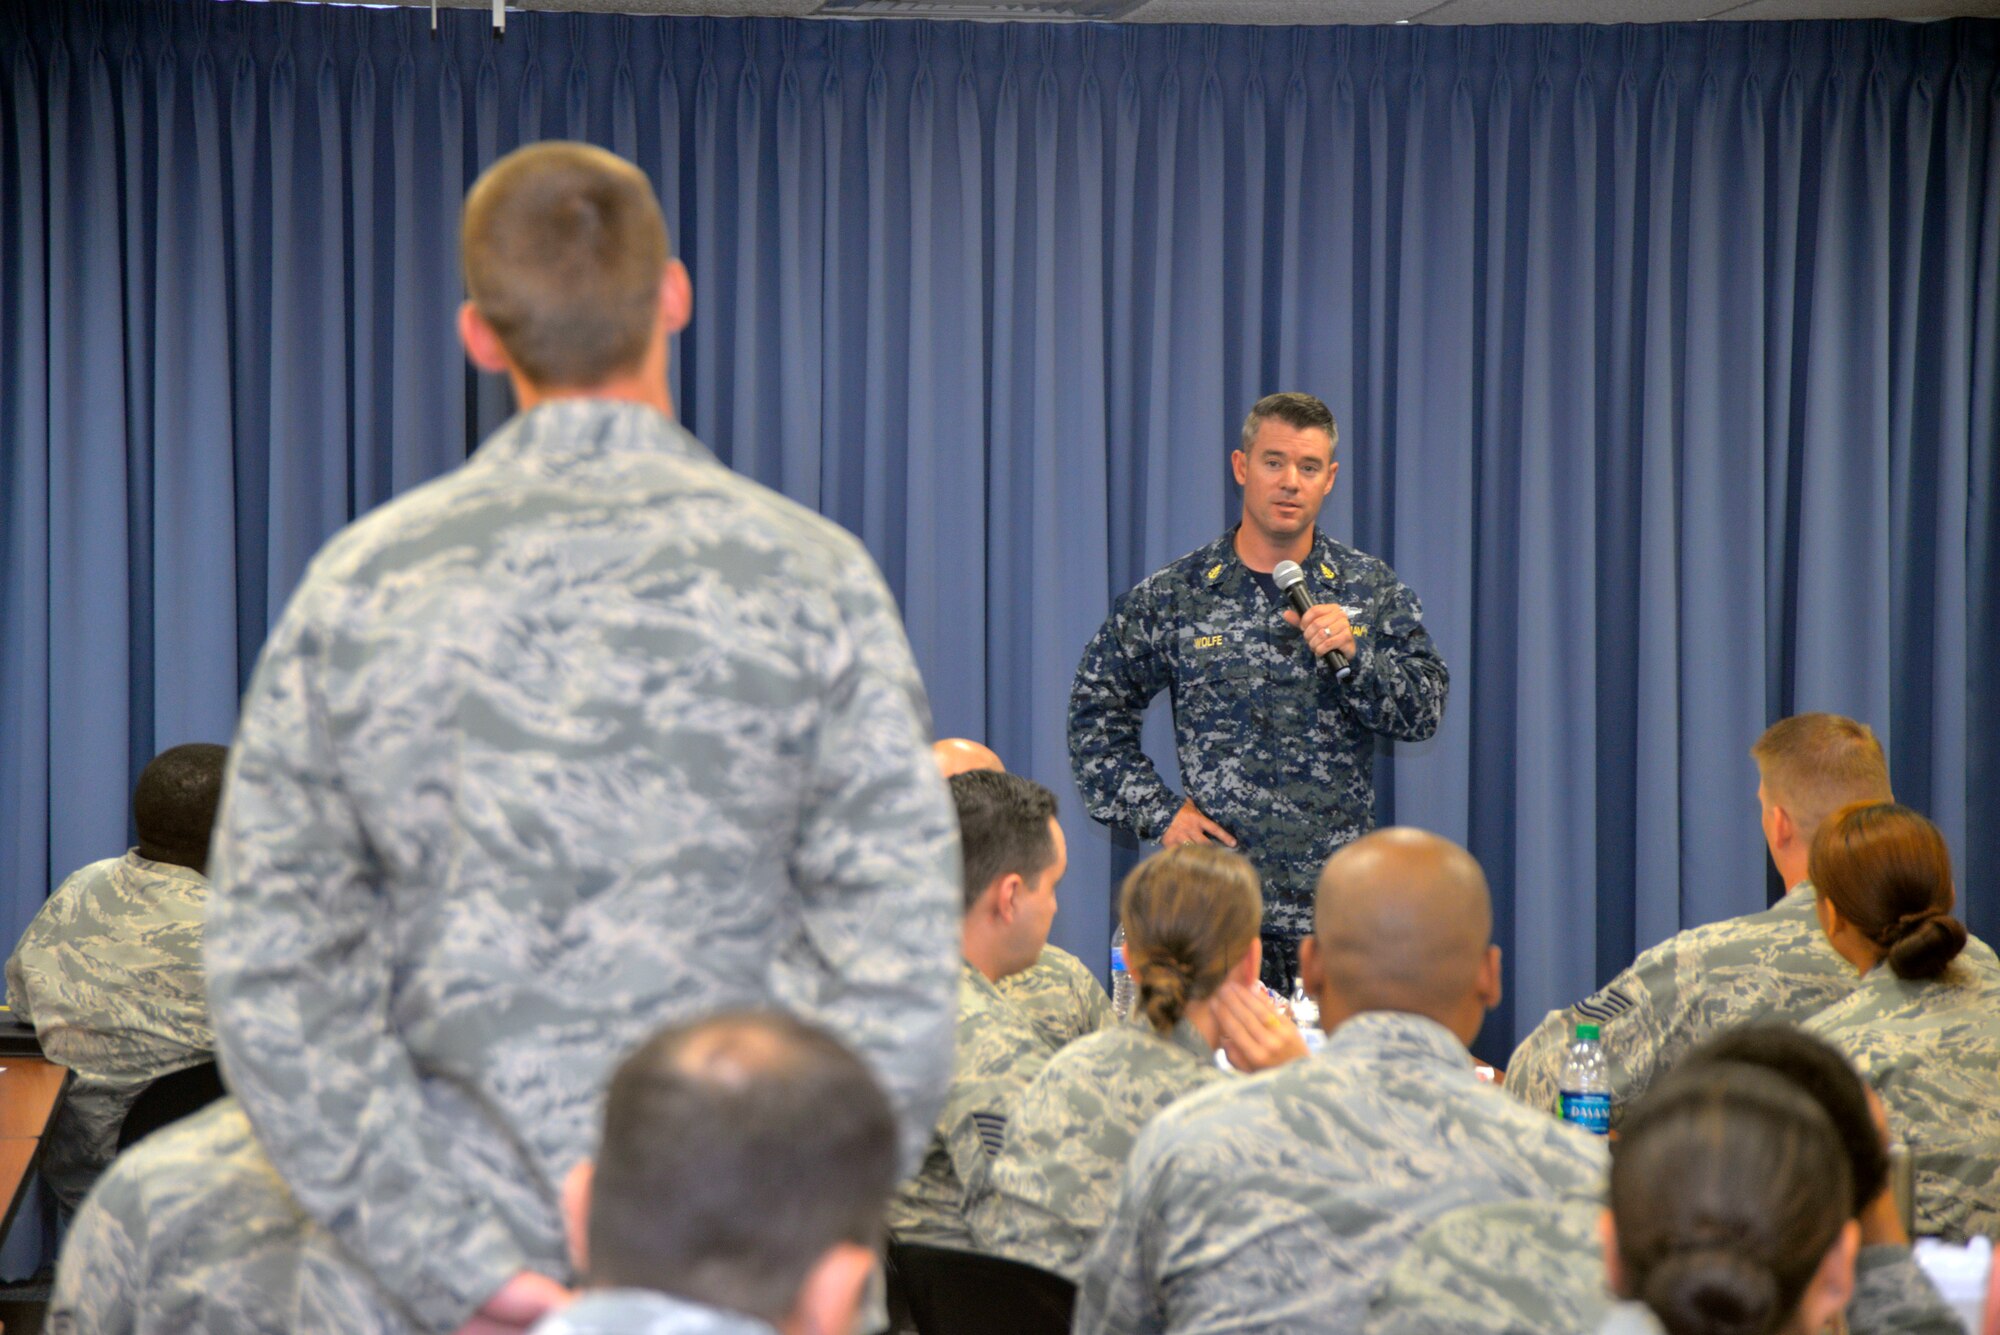 Navy Senior Chief Petty Officer Trevor Wolfe, U.S. Transportation Command Command Surgeon's Office, answers a question at the Scott Air Force Base Senior NCO Professional Enhancement Course on Scott AFB June 28, 2018.